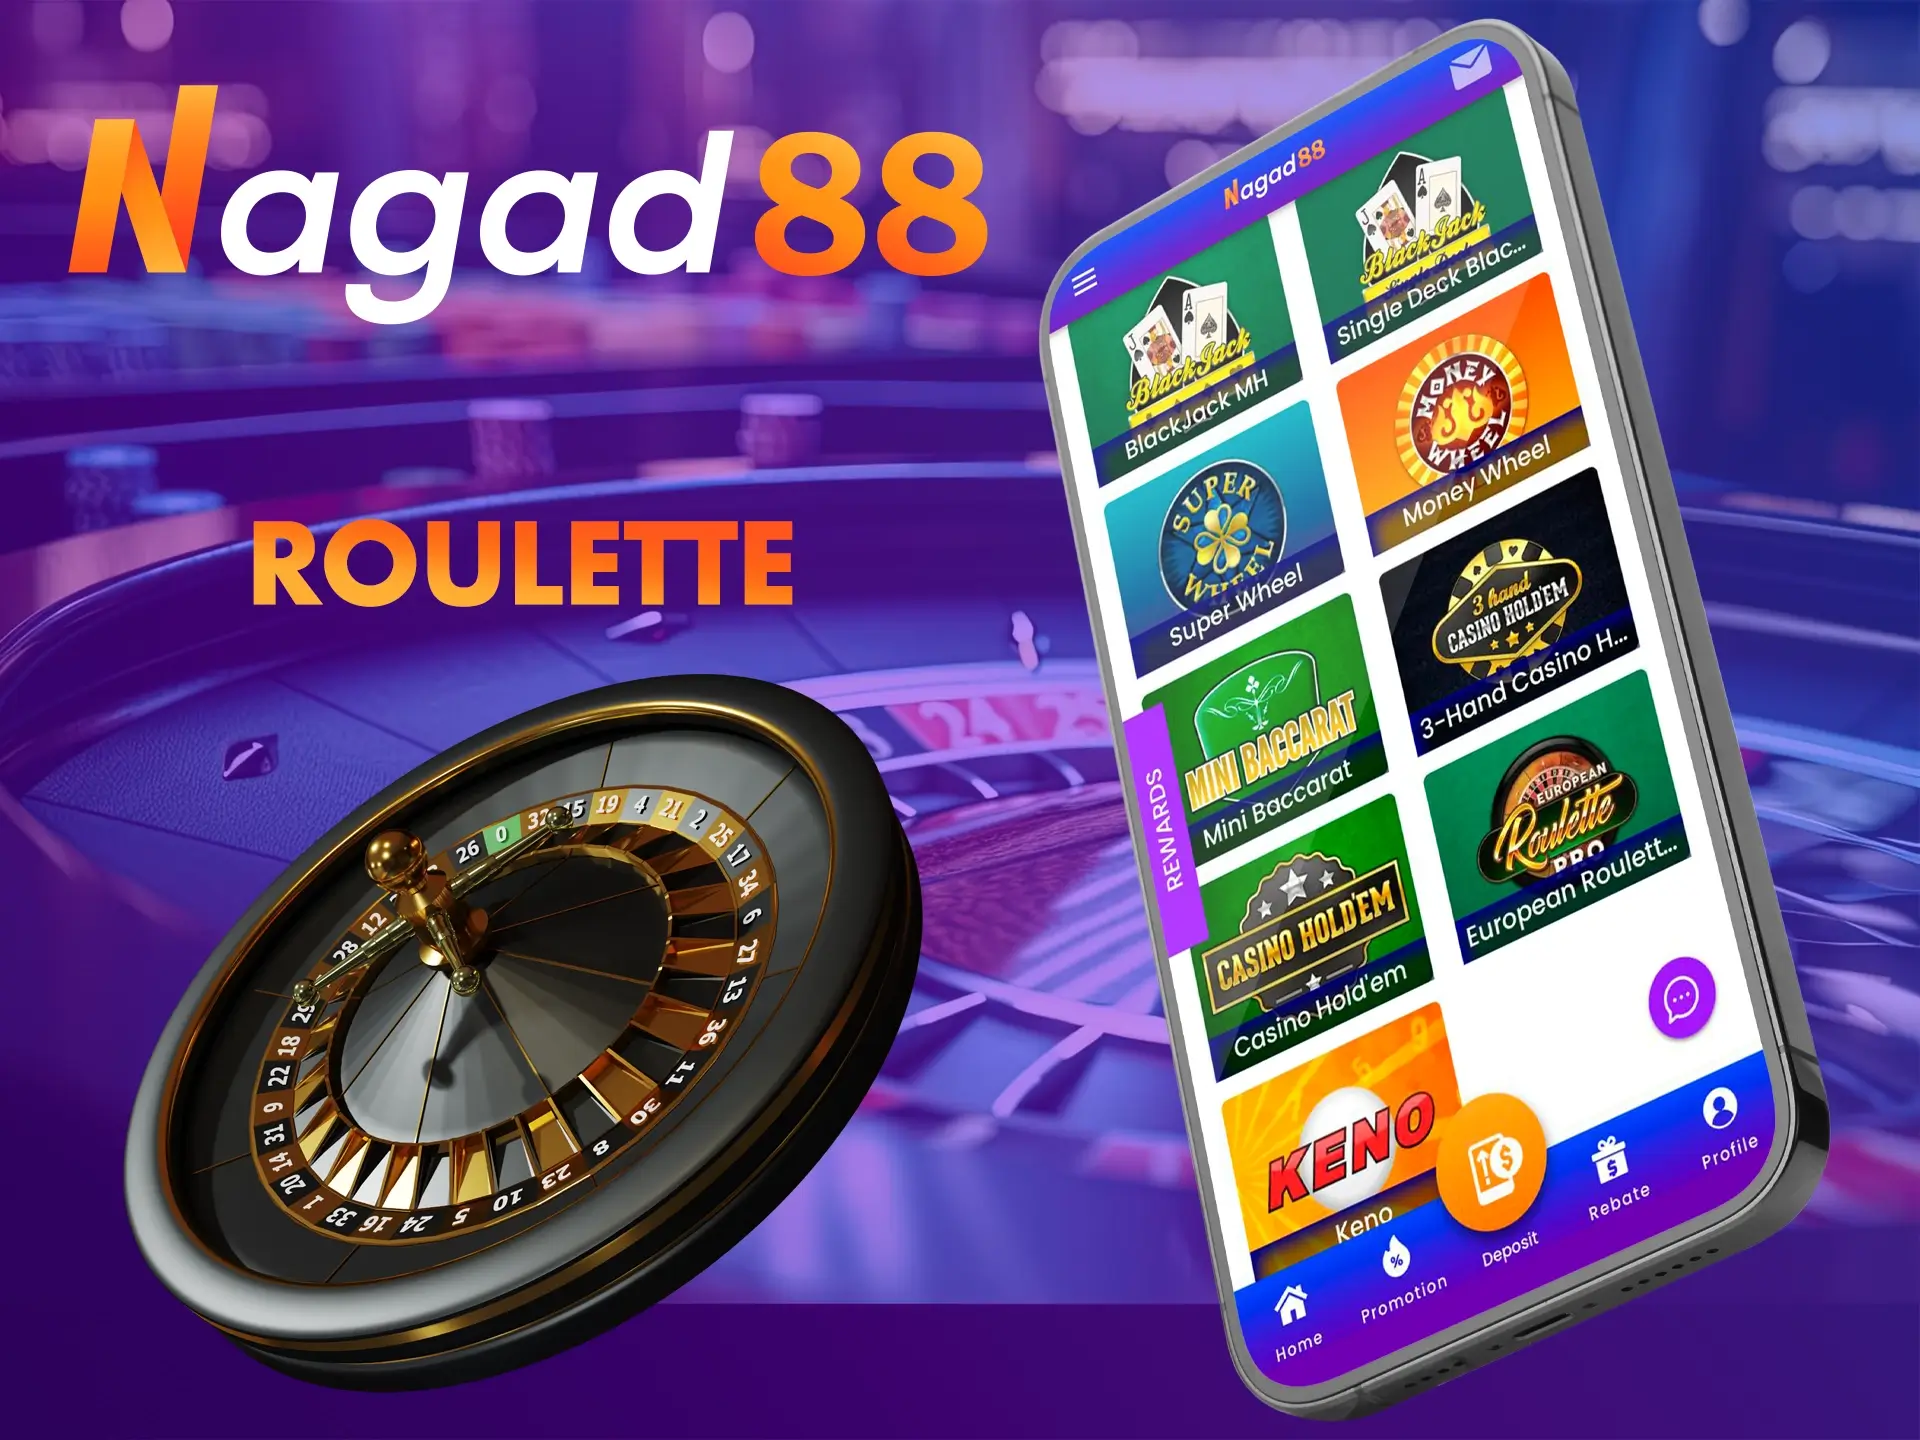 Take advantage of your luck when playing roulette at Nagad88 Casino.